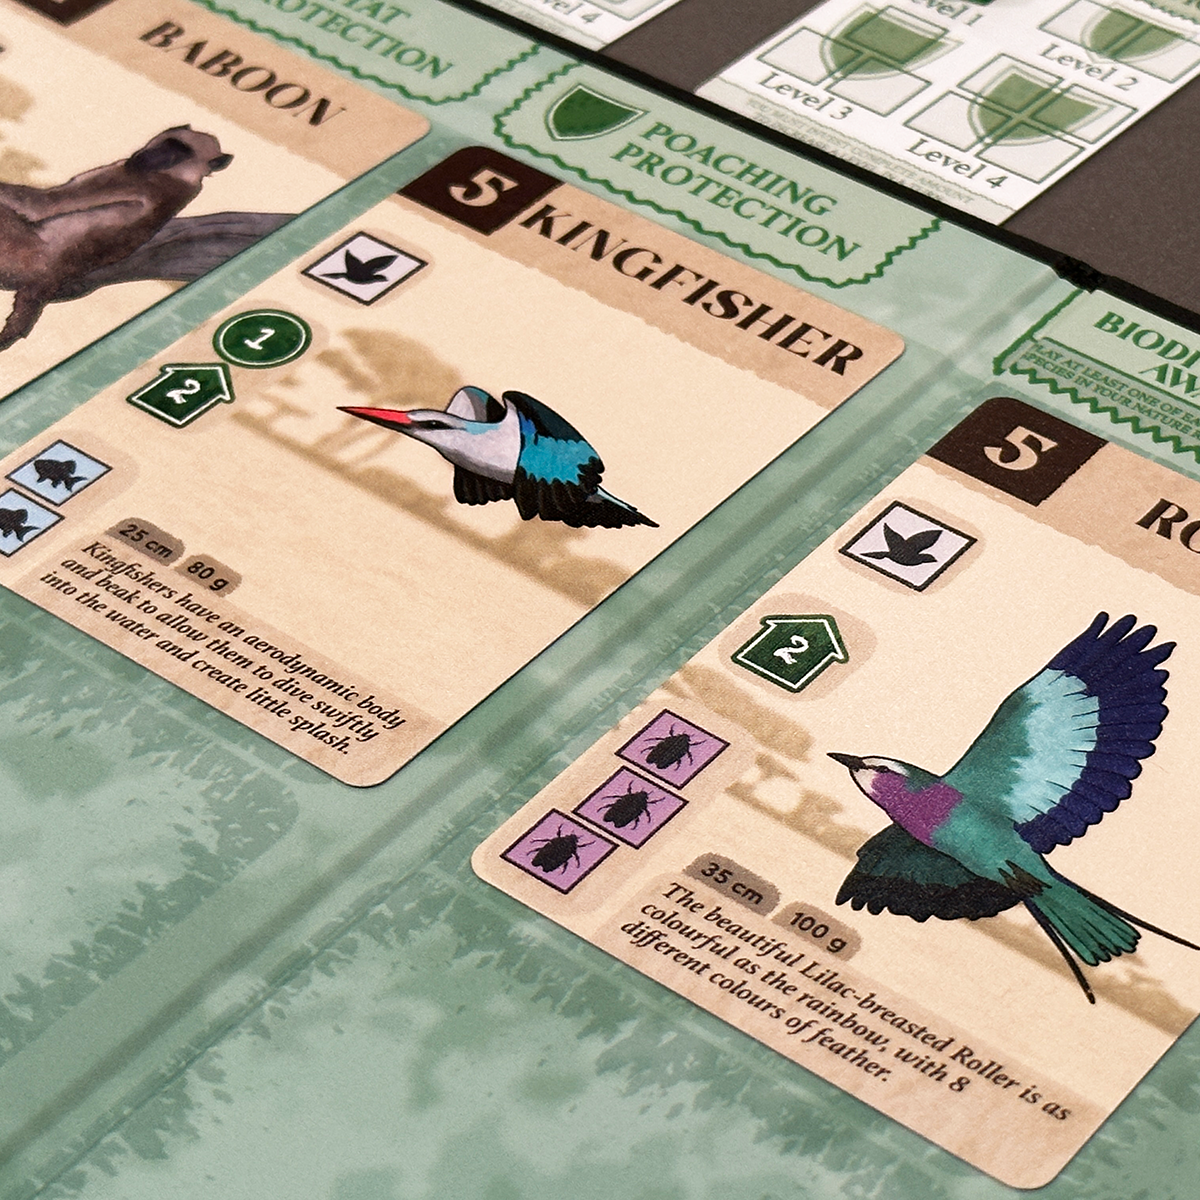 Two bird cards from KavangoImage © Board Game Review UK